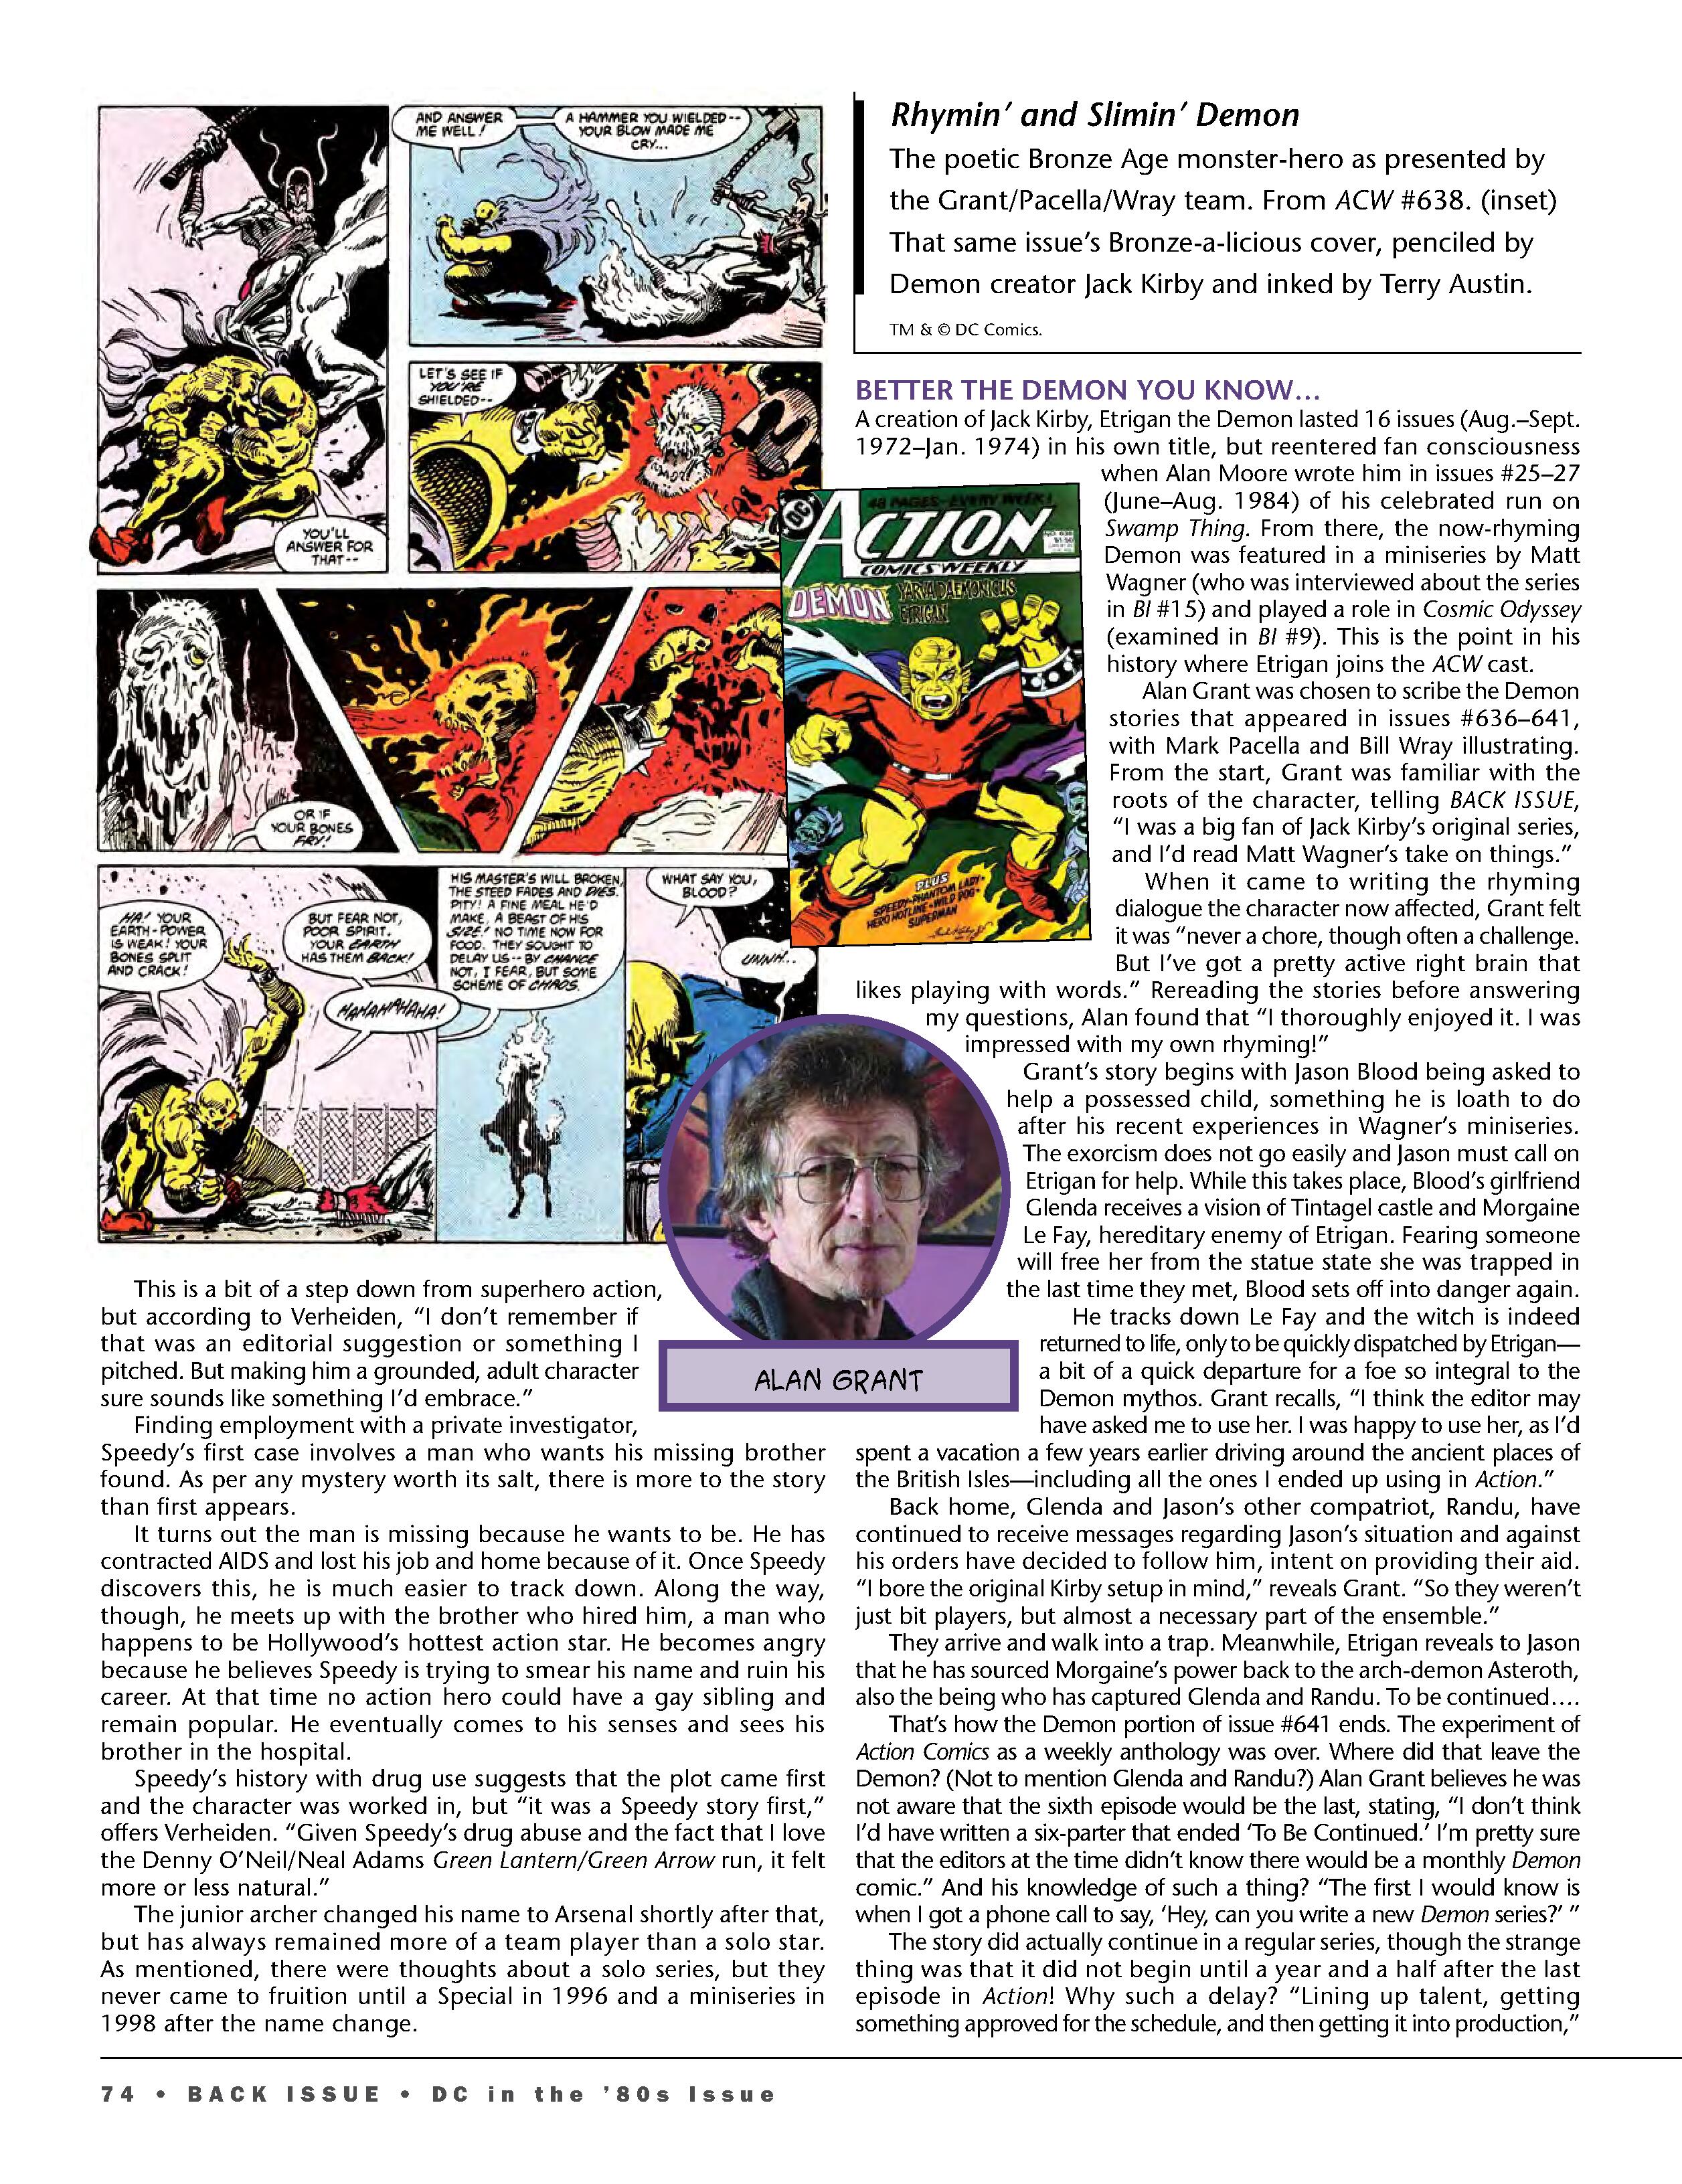 Read online Back Issue comic -  Issue #98 - 76